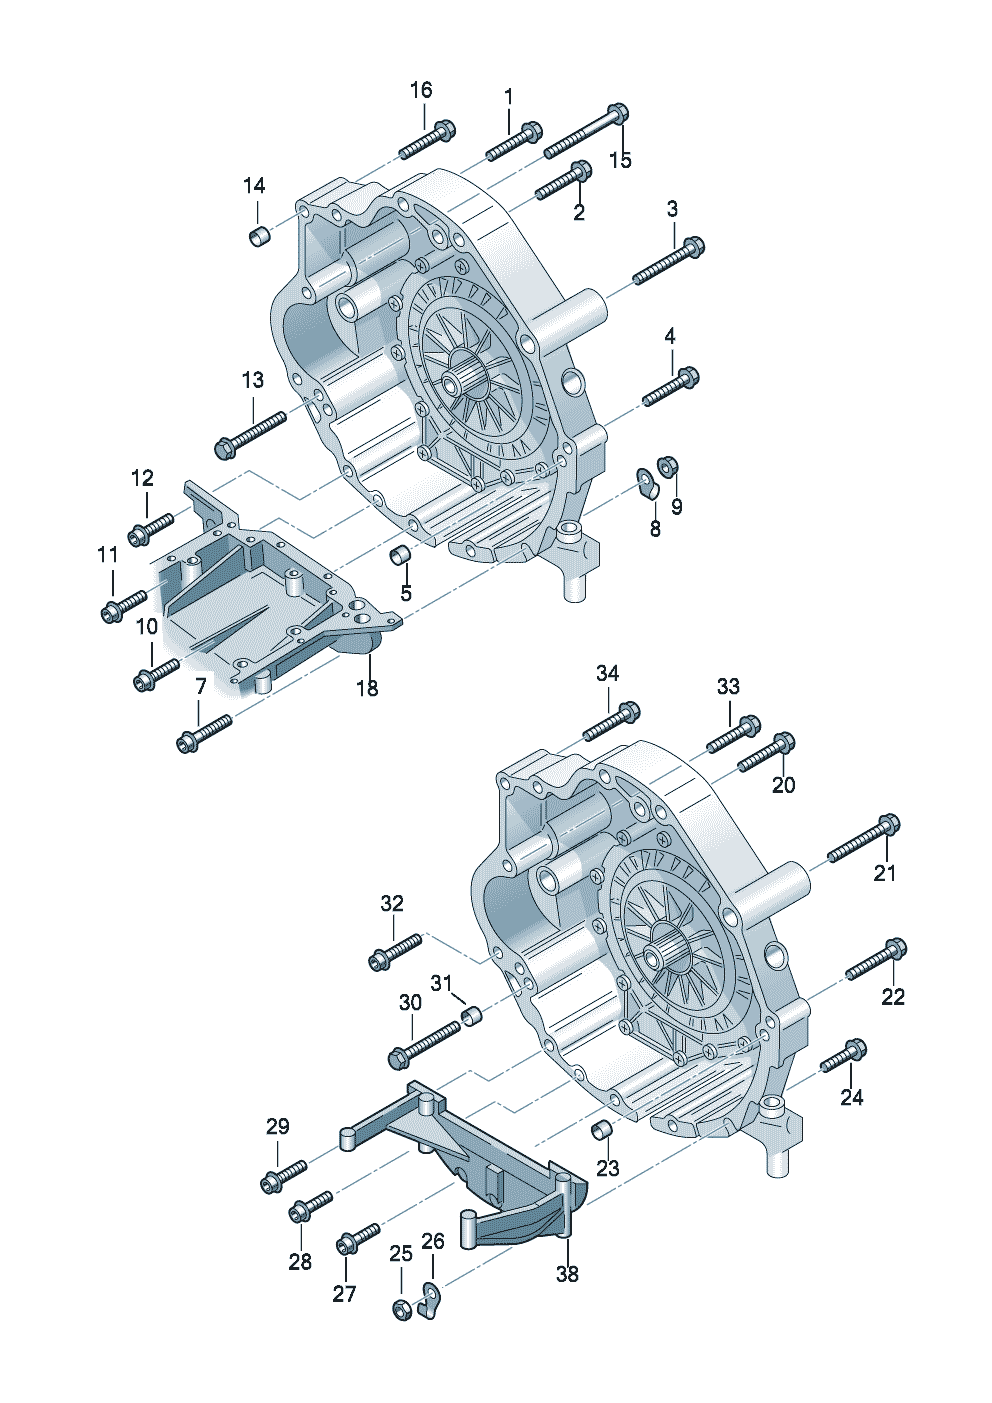 mounting parts for engine and<br>transmission5-speed automatic gearboxfor four-wheel drive 4 cylinder - Audi A4/Avant - a4